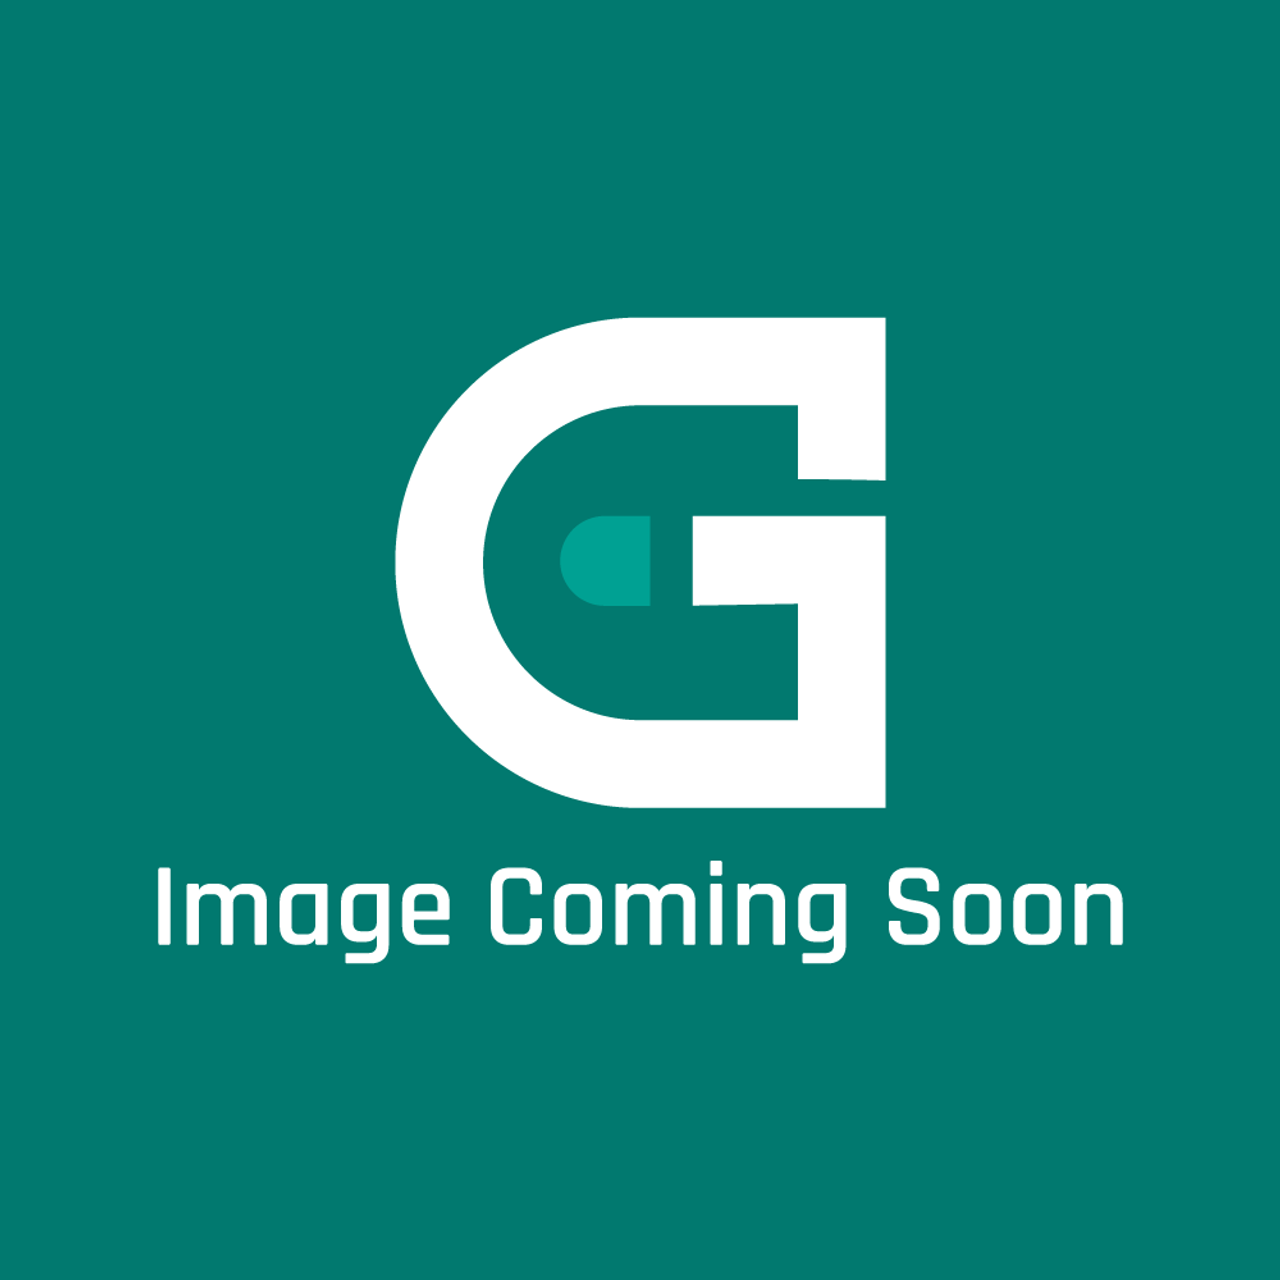 Garland 4523327 - Sunfire Outer Door Panel - Image Coming Soon!